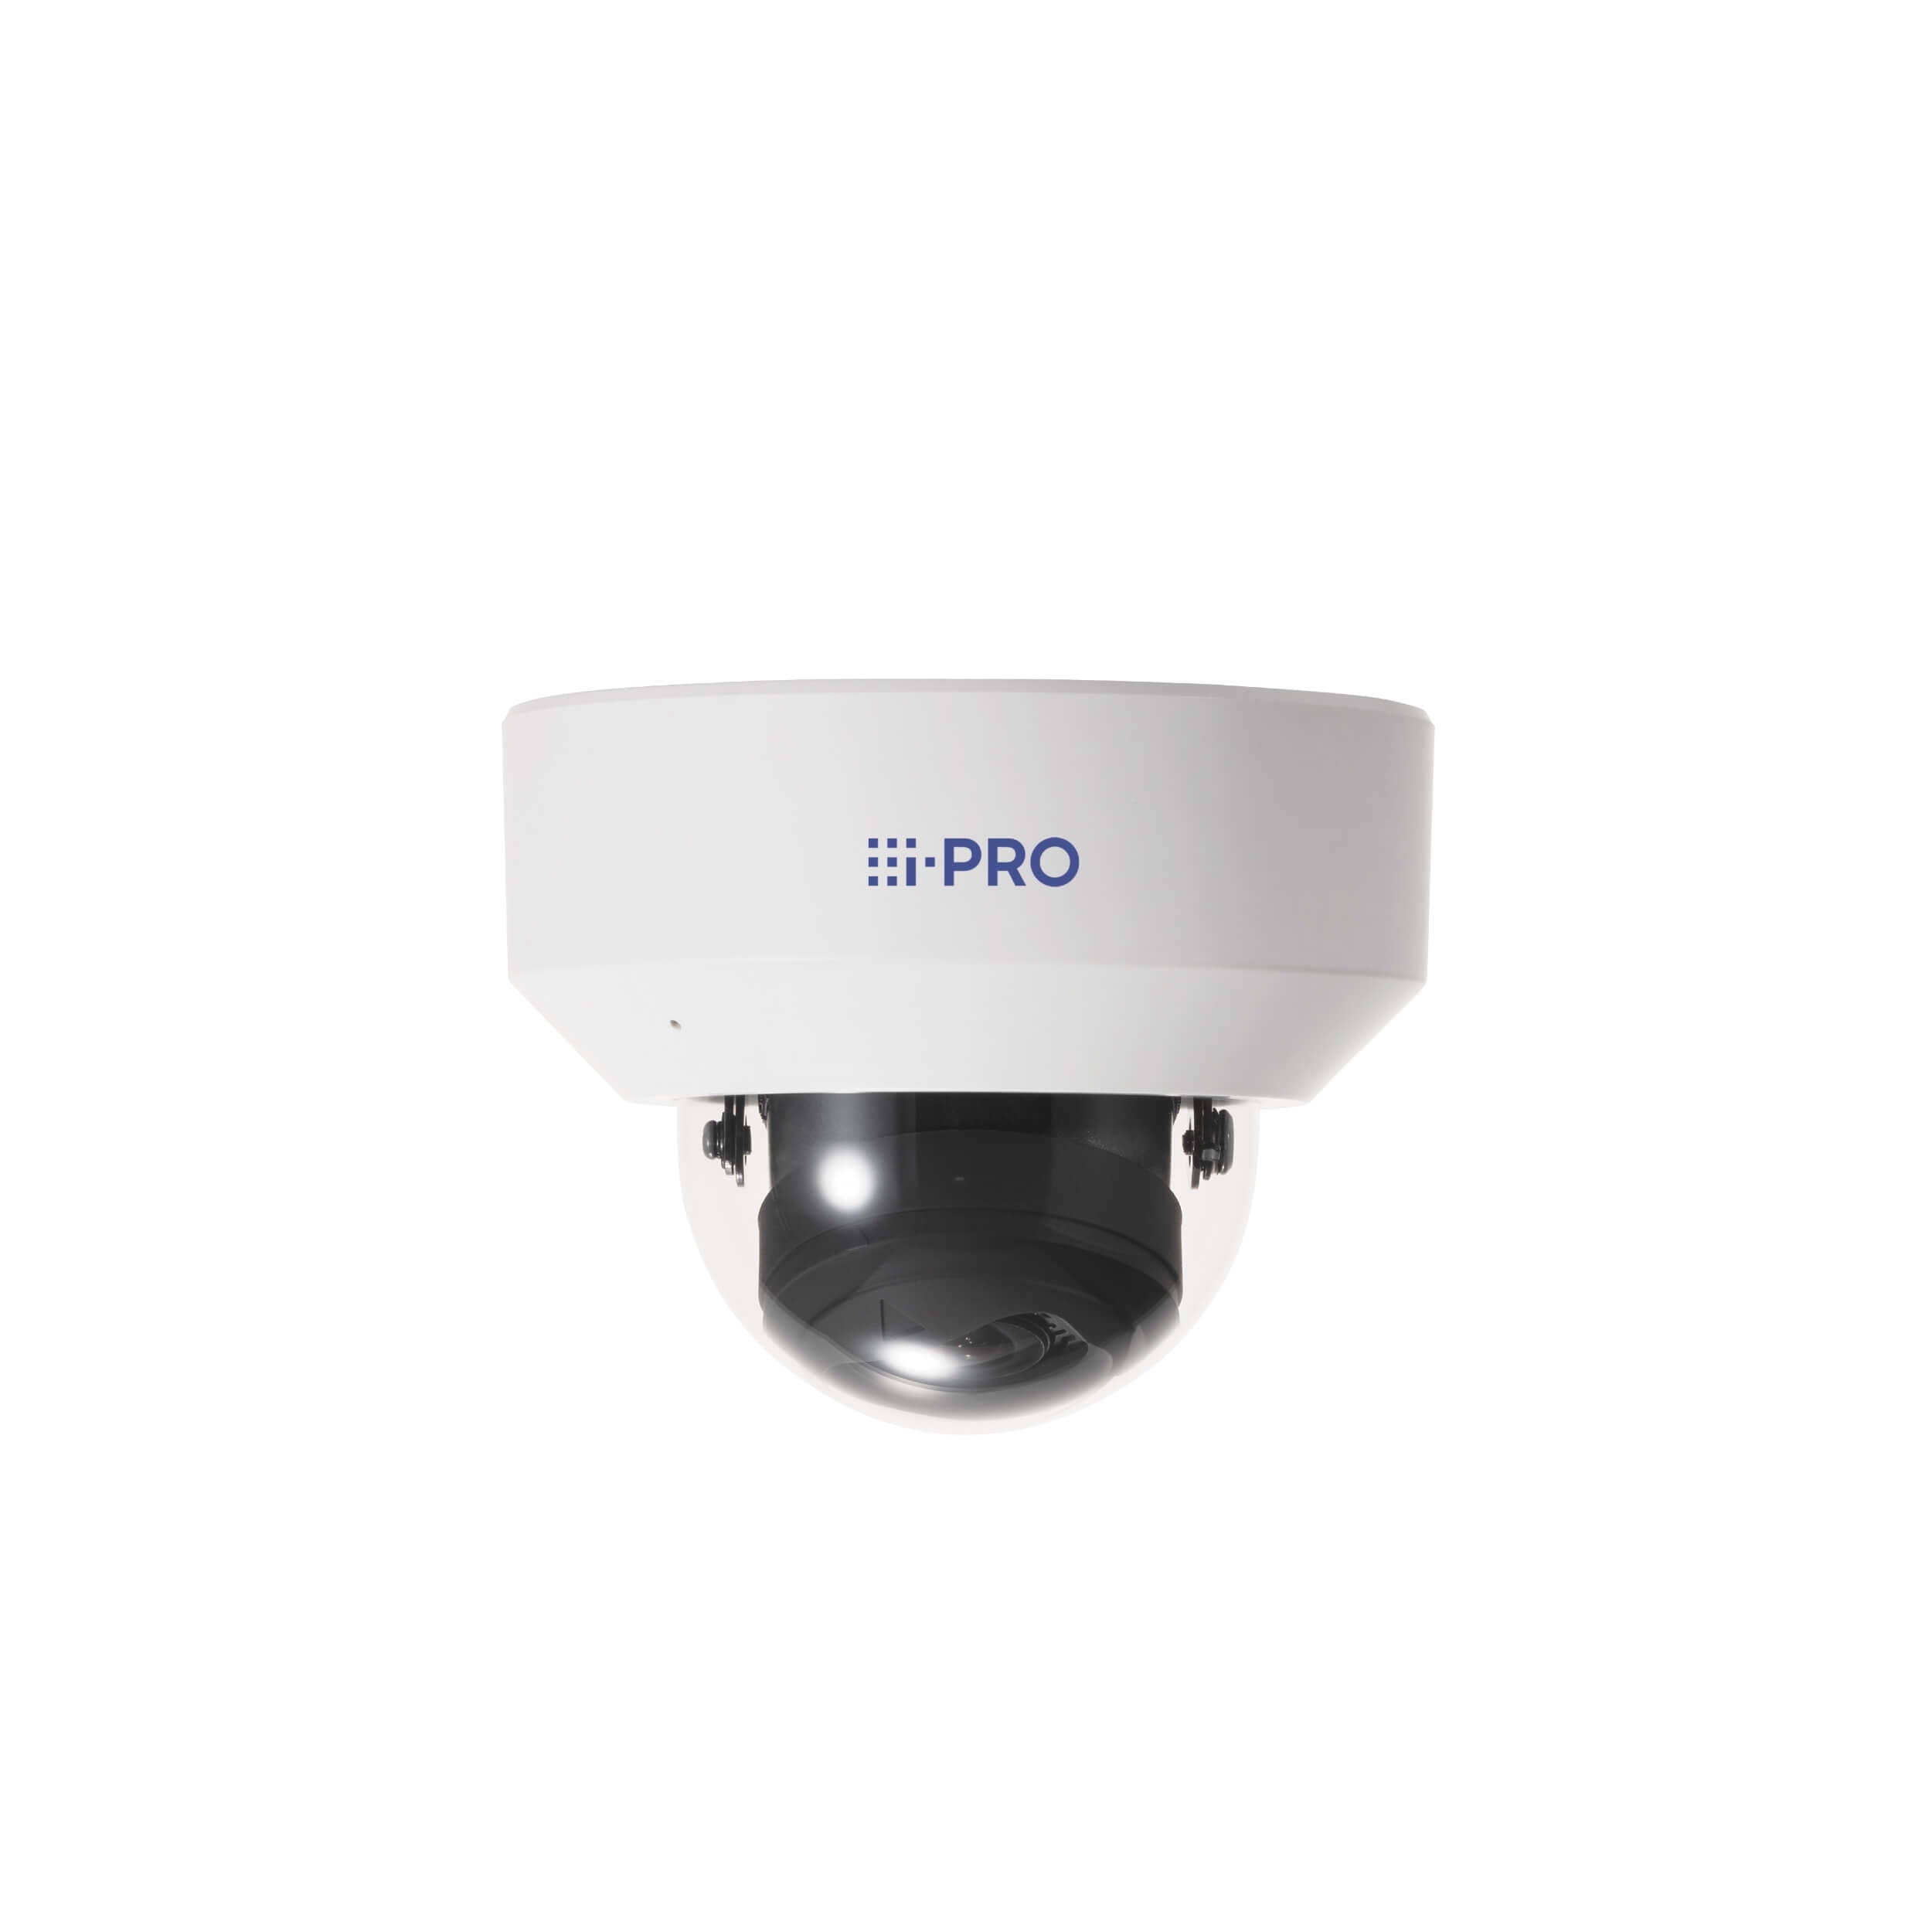 Panasonic i-PRO 2MP (1080p) Vandal Resistant Indoor Dome Network Camera with AI engine